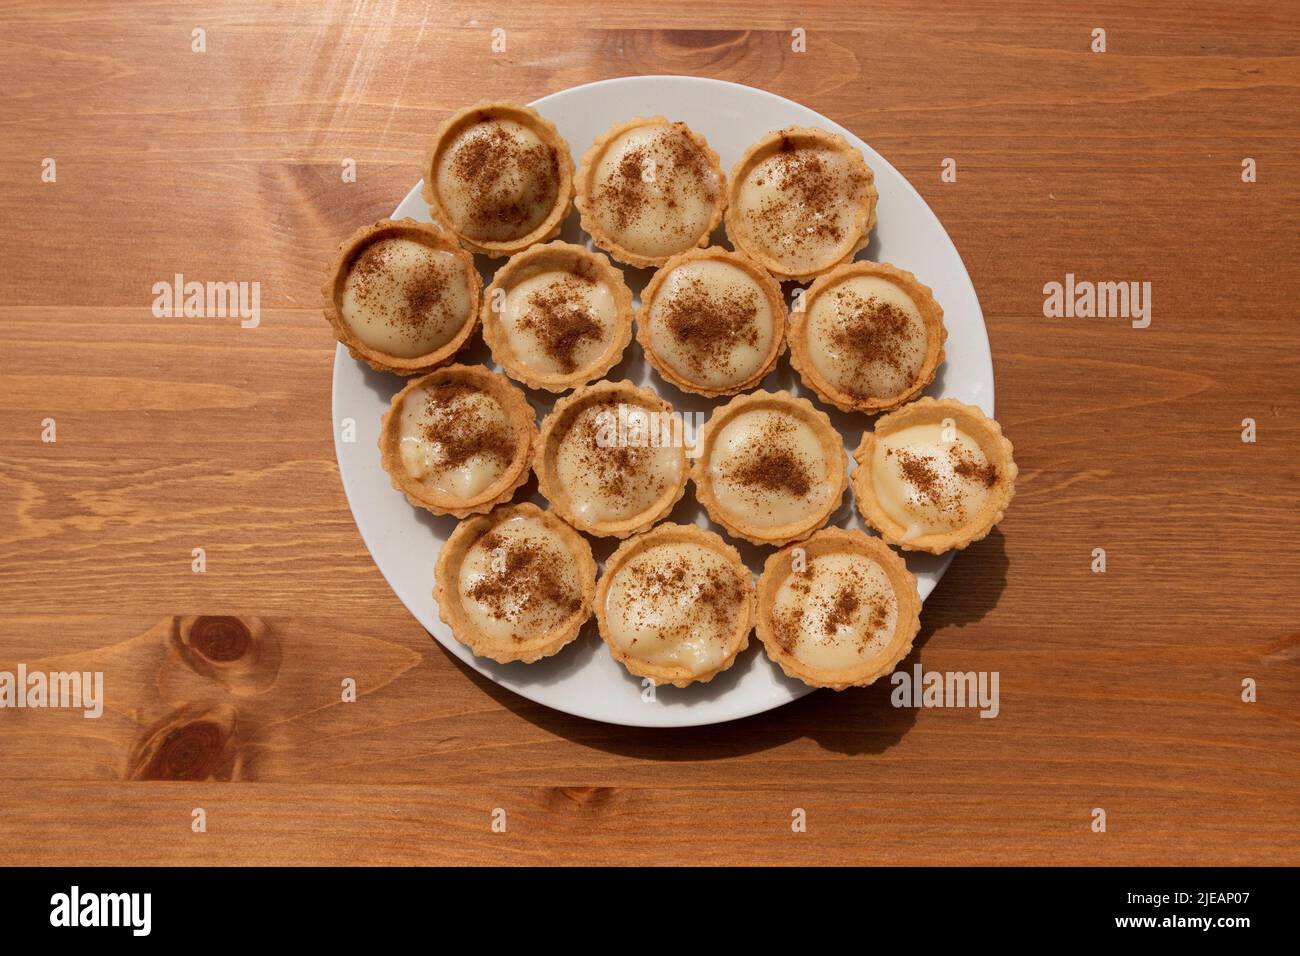 A close up view of a milk tart traditional south african desert Stock Photo